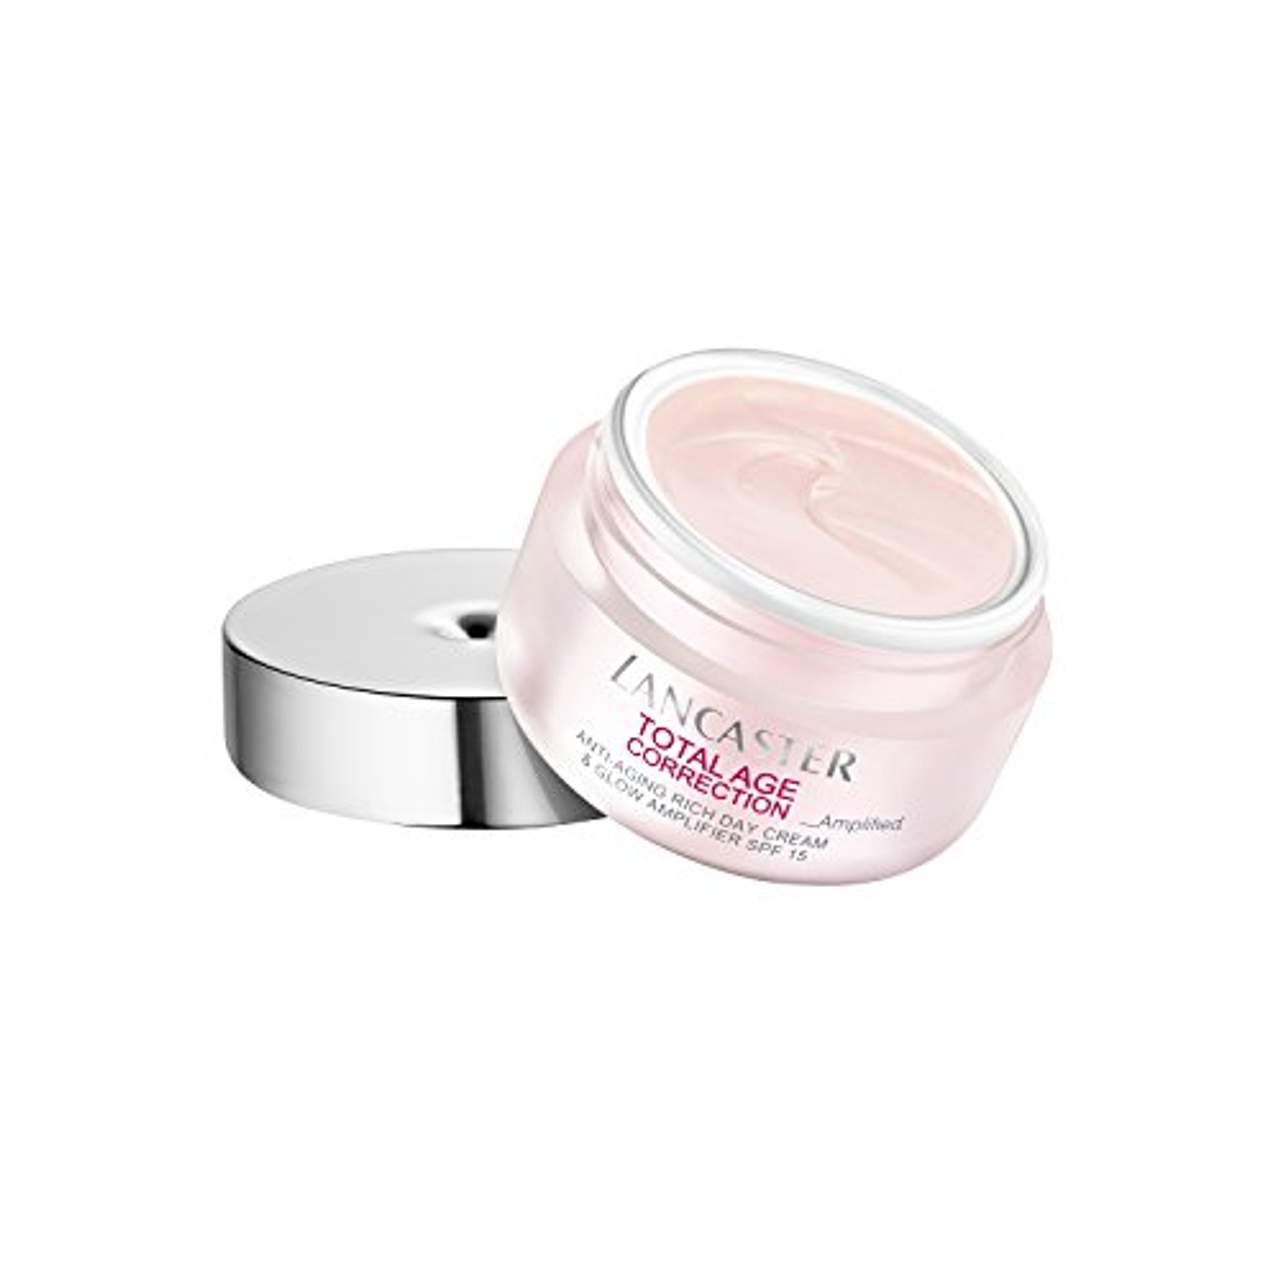 Lancaster Pflege Total Age Correction Anti-Aging Rich Day Cream & Glow